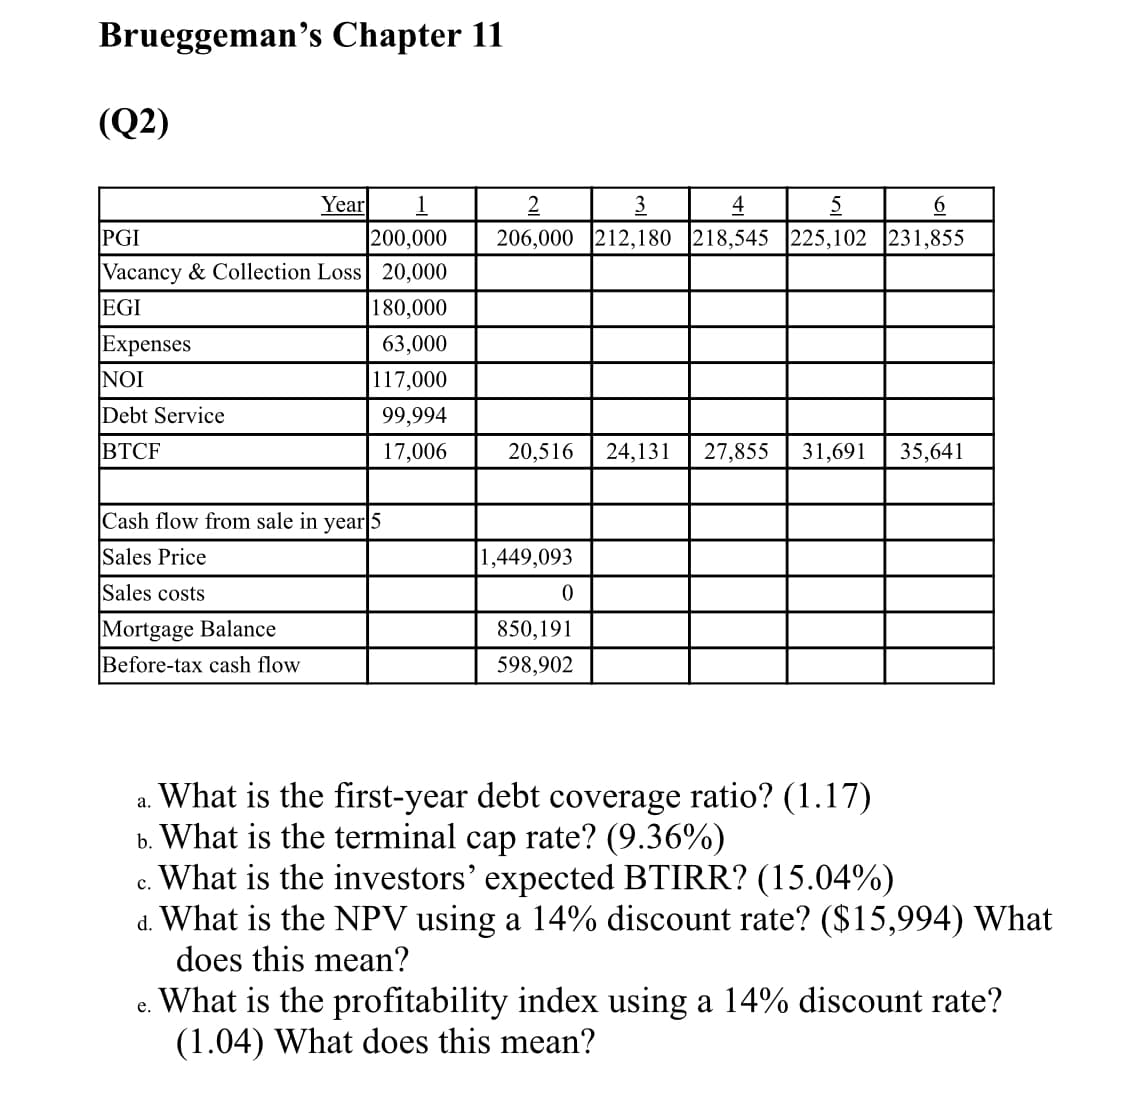 Brueggeman's Chapter 11
(Q2)
Year
200,000
Vacancy & Collection Loss 20,000
1
2
3
4
5
6.
PGI
206,000 212,180 218,545 225,102 231,855
EGI
180,000
Expenses
63,000
NOI
117,000
Debt Service
99,994
ВТСР
17,006
20,516
24,131
27,855
31,691
35,641
Cash flow from sale in year5
Sales Price
1,449,093
Sales costs
Mortgage Balance
Before-tax cash flow
850,191
598,902
What is the first-year debt coverage ratio? (1.17)
b. What is the terminal cap rate? (9.36%)
What is the investors' expected BTIRR? (15.04%)
d. What is the NPV using a 14% discount rate? ($15,994) What
does this mean?
а.
с.
What is the profitability index using a 14% discount rate?
(1.04) What does this mean?
е.
